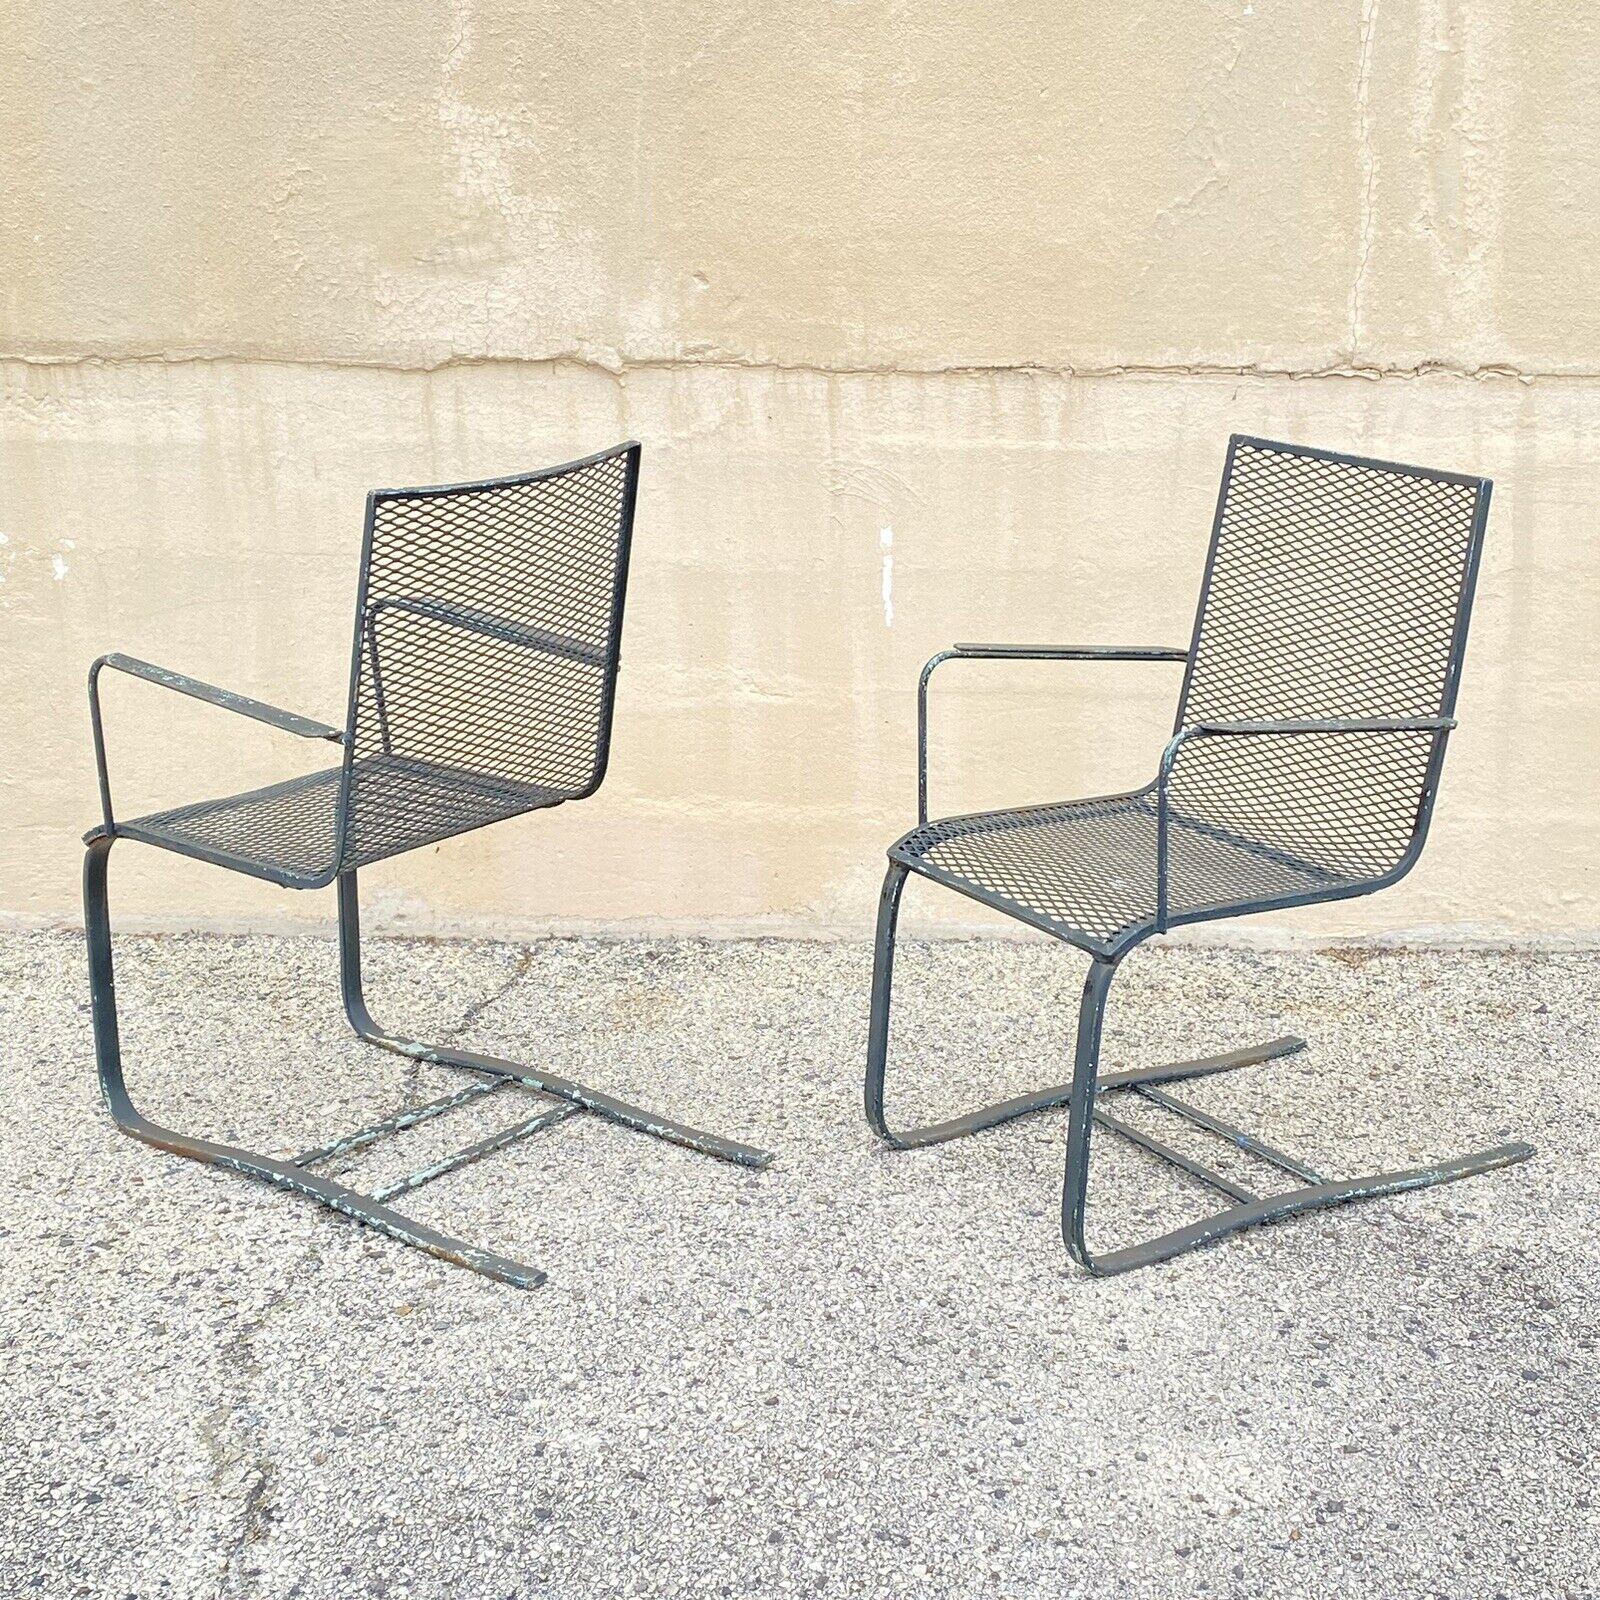 Industrial Modern Wrought Iron Metal Mesh Cantilever Garden Patio Chair - a Pair For Sale 5